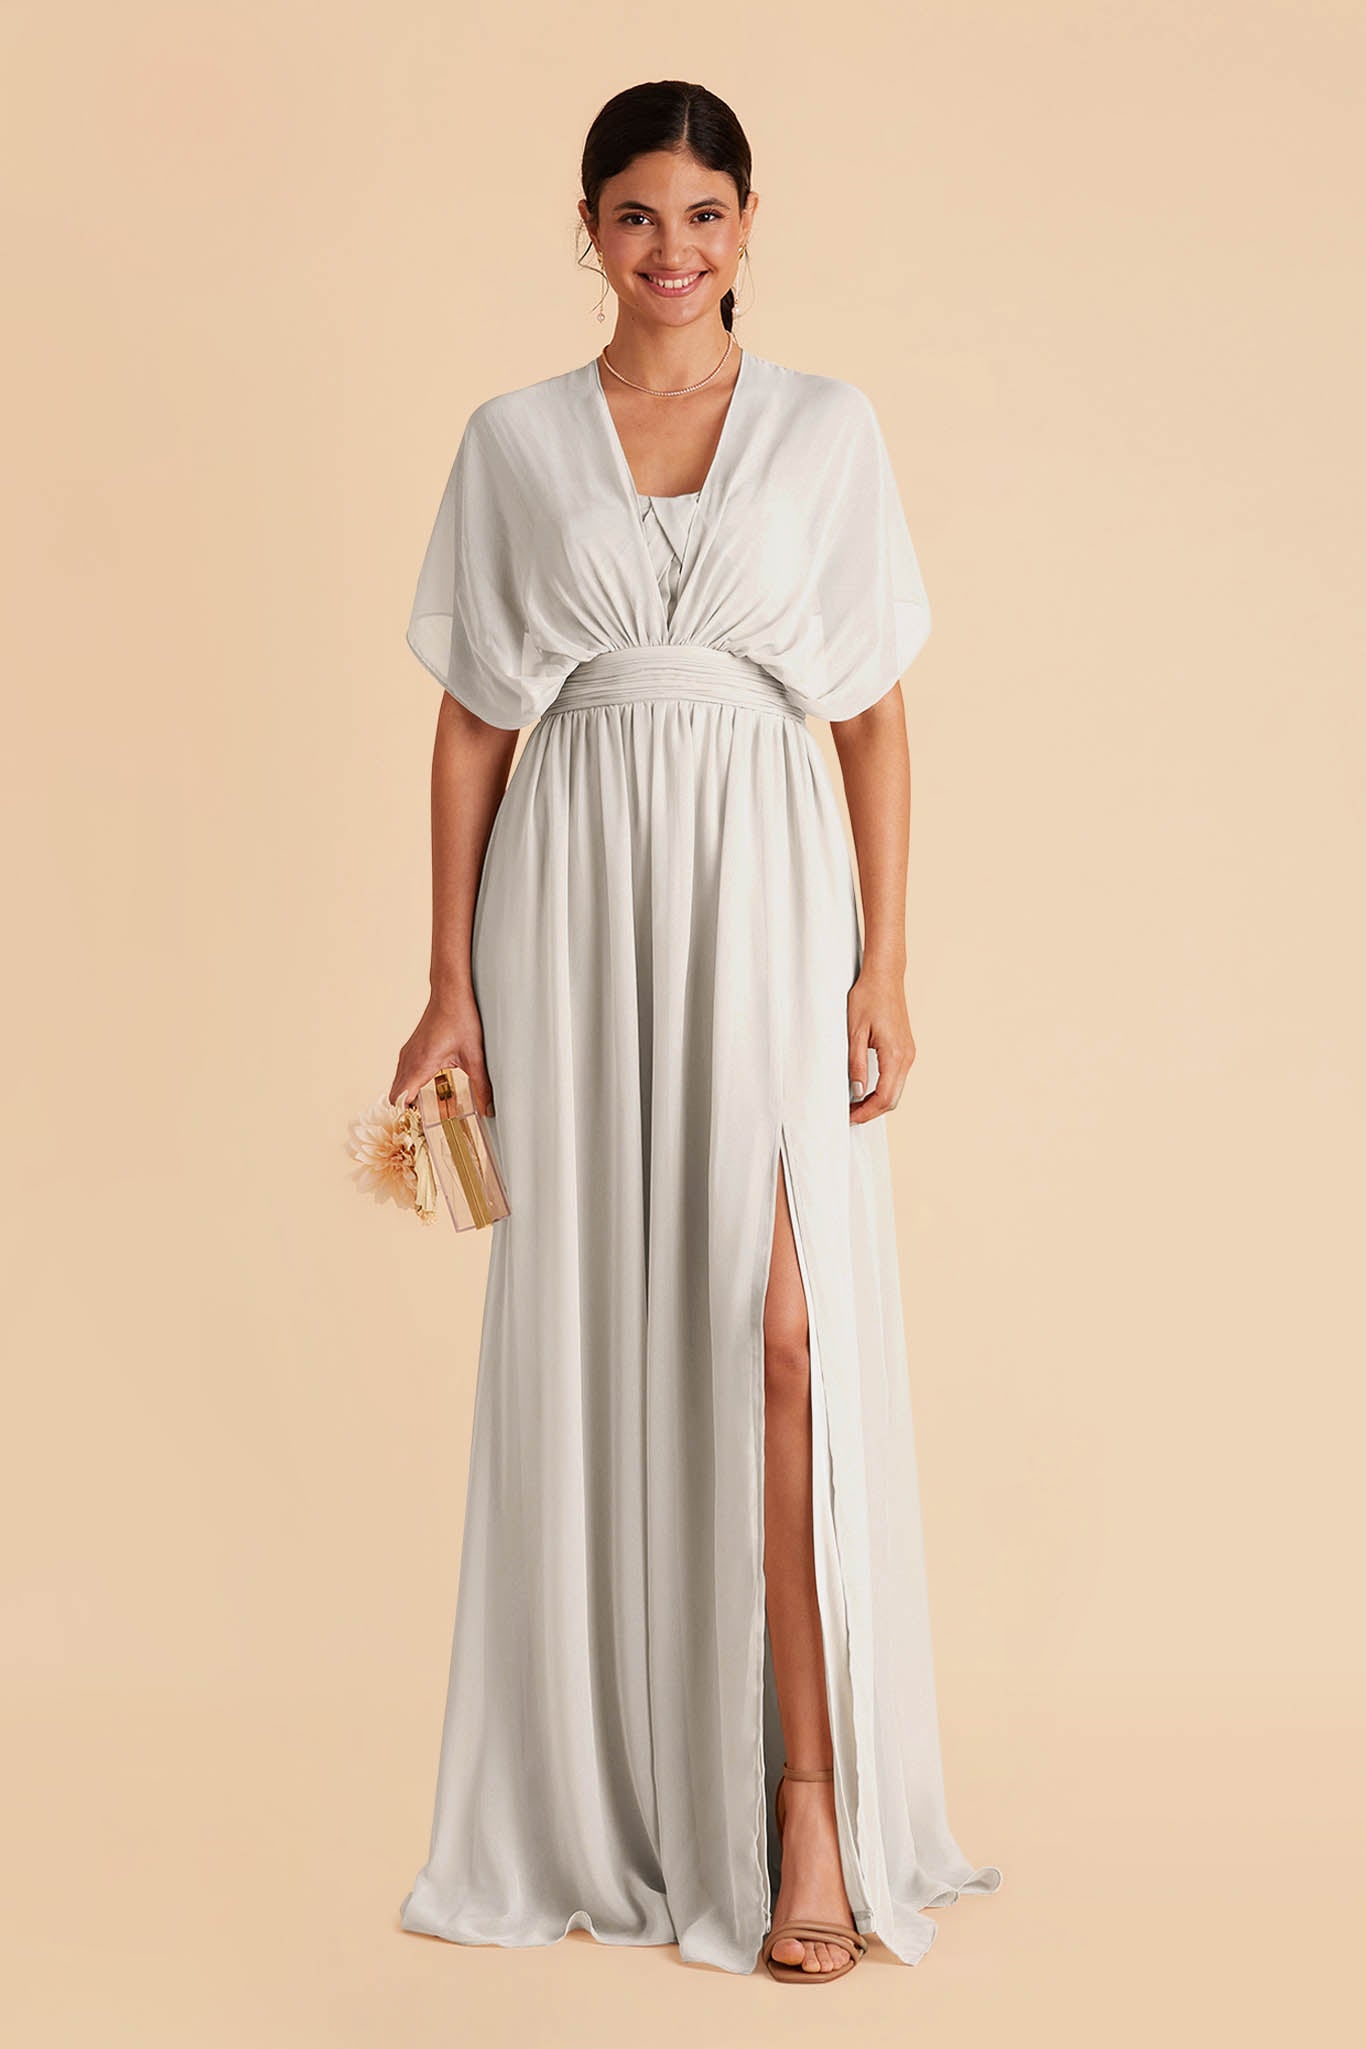 Dove Gray Grace Convertible Dress by Birdy Grey